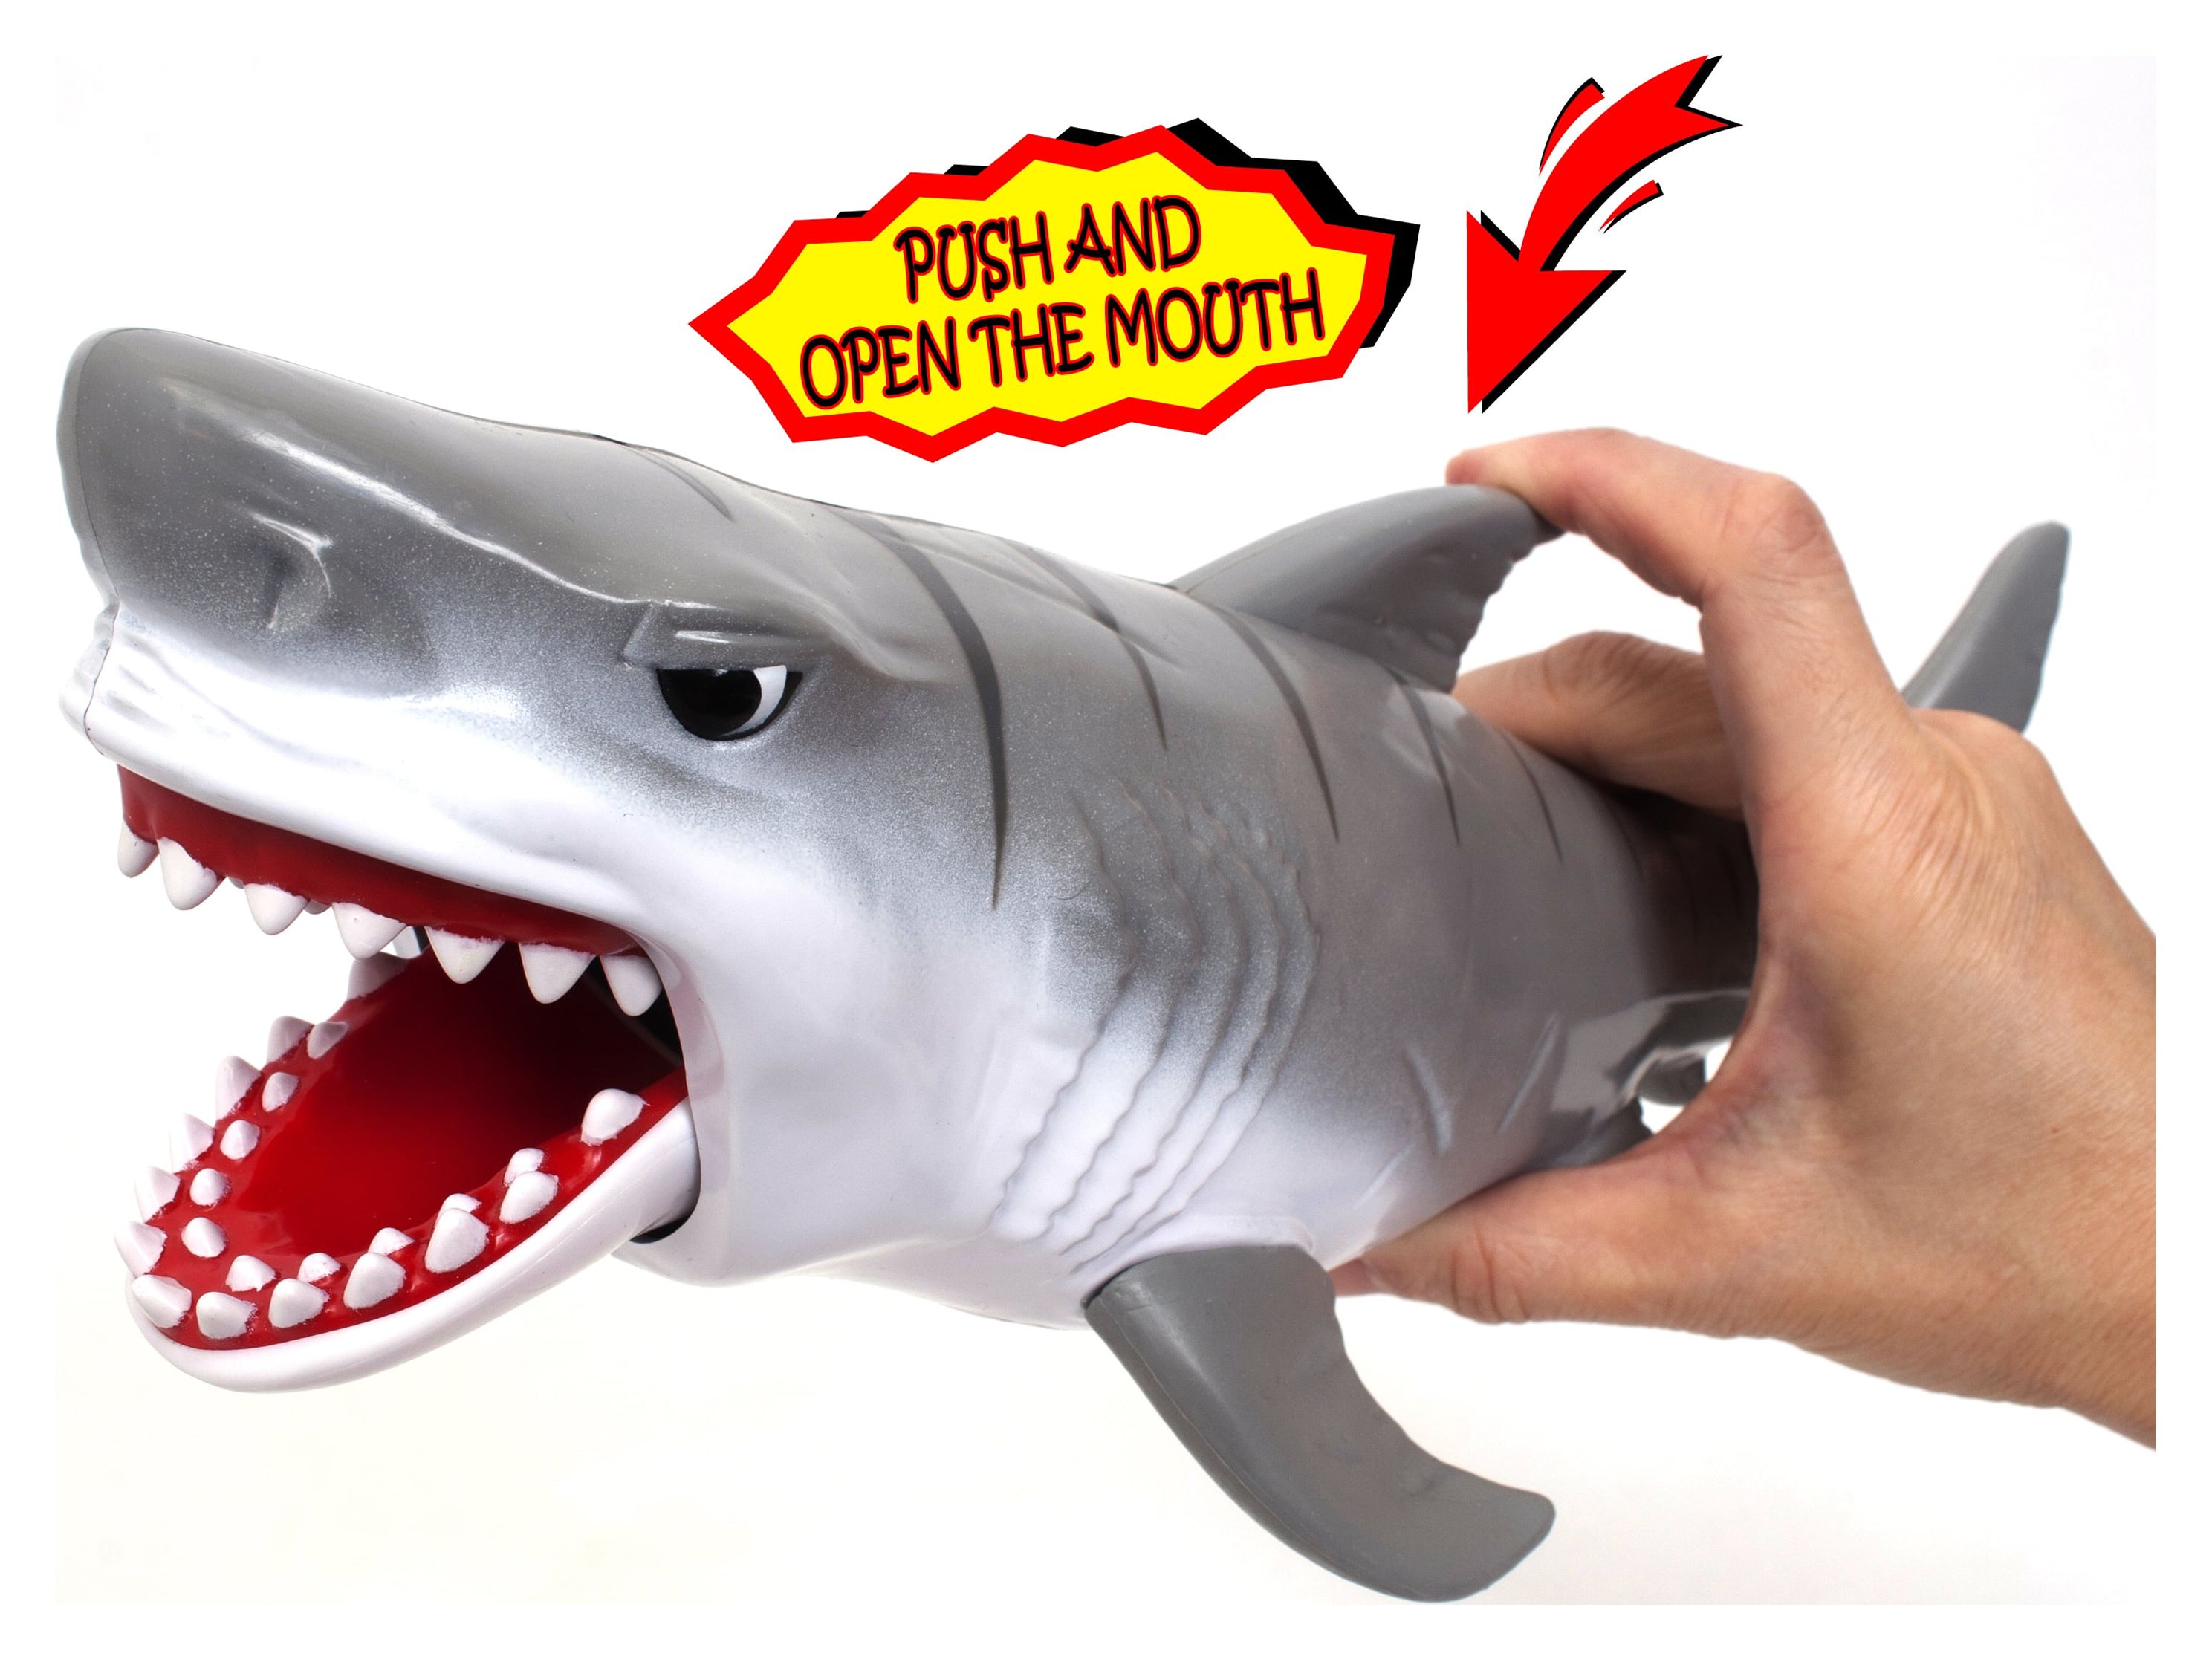 Adventure Force Crunch & Carry Shark Toy, 5 Pieces - image 3 of 5